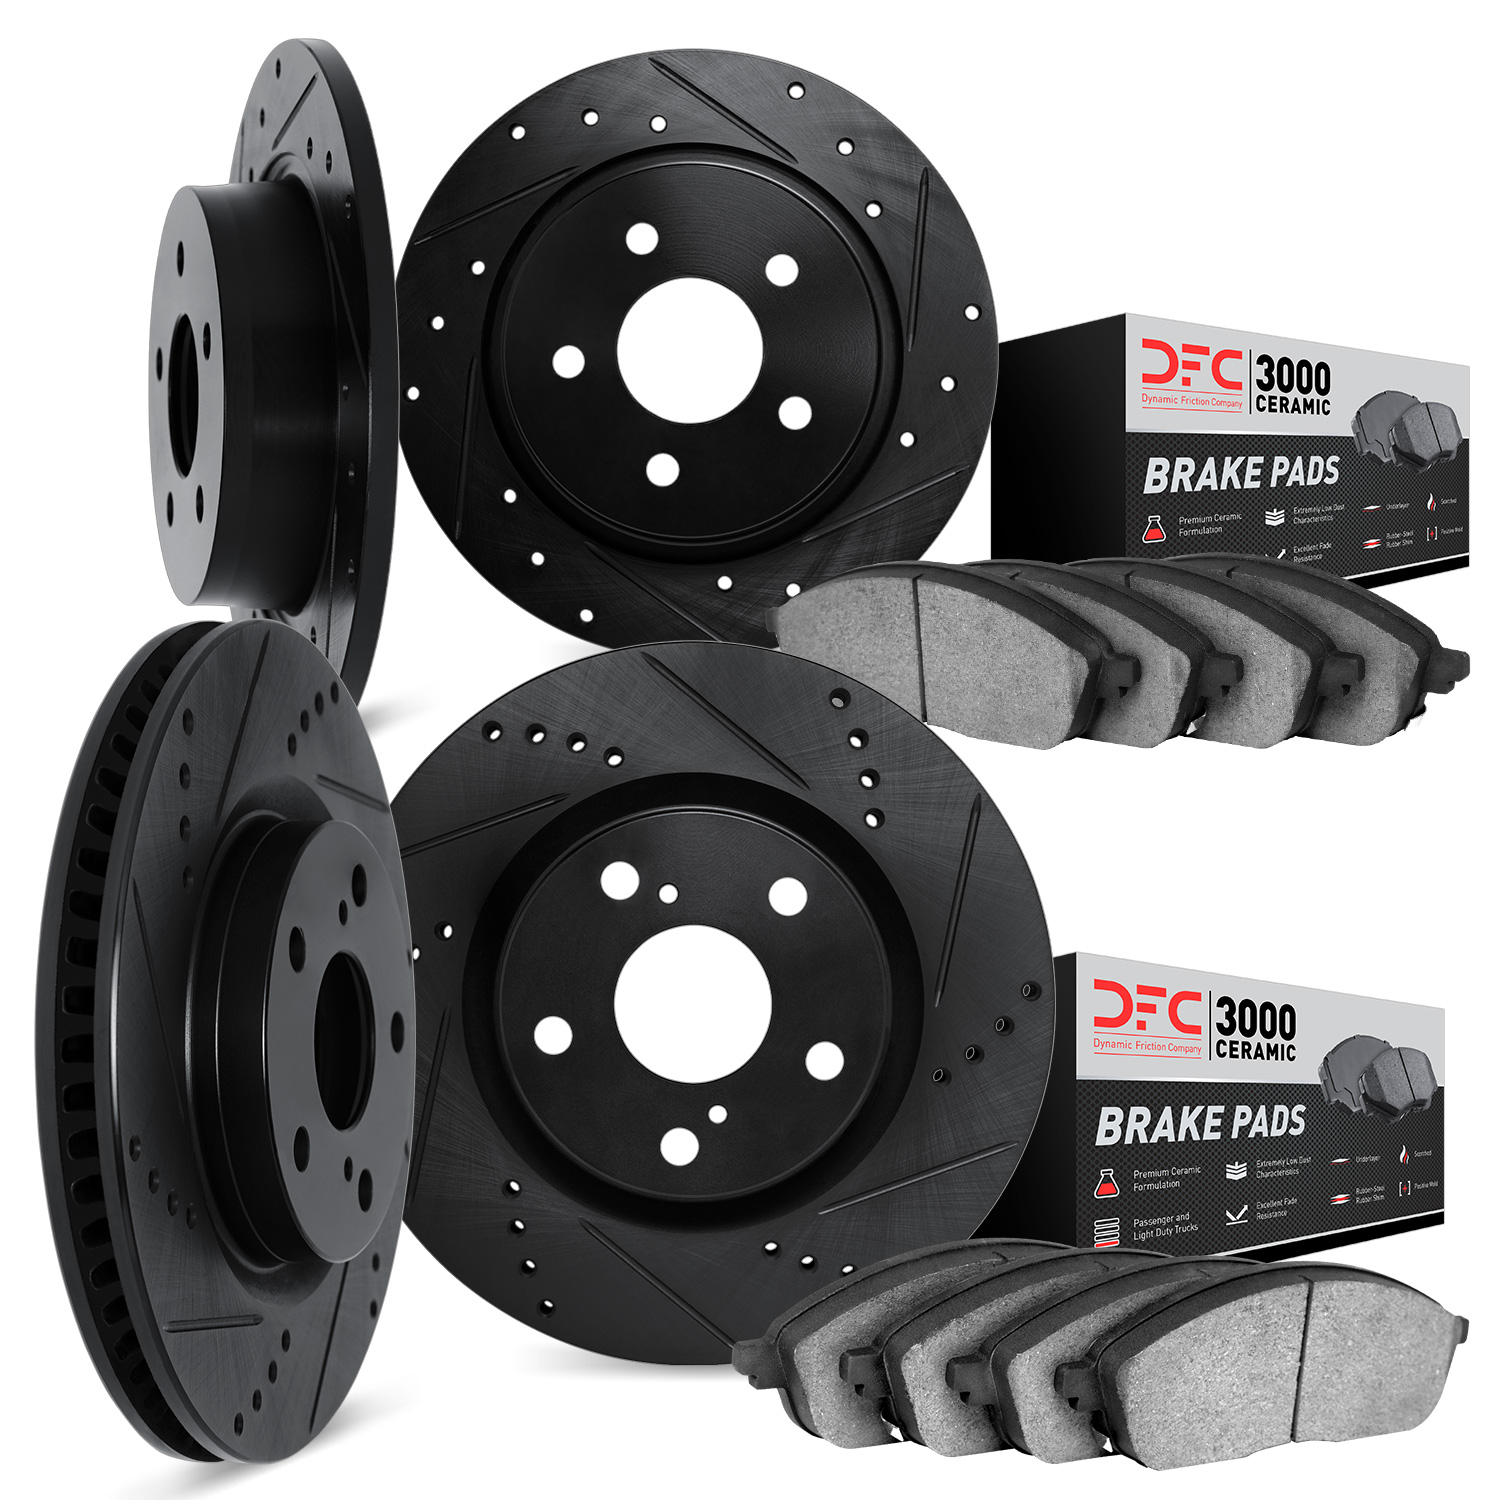 8304-42016 Drilled/Slotted Brake Rotors with 3000-Series Ceramic Brake Pads Kit [Black], Fits Select Mopar, Position: Front and